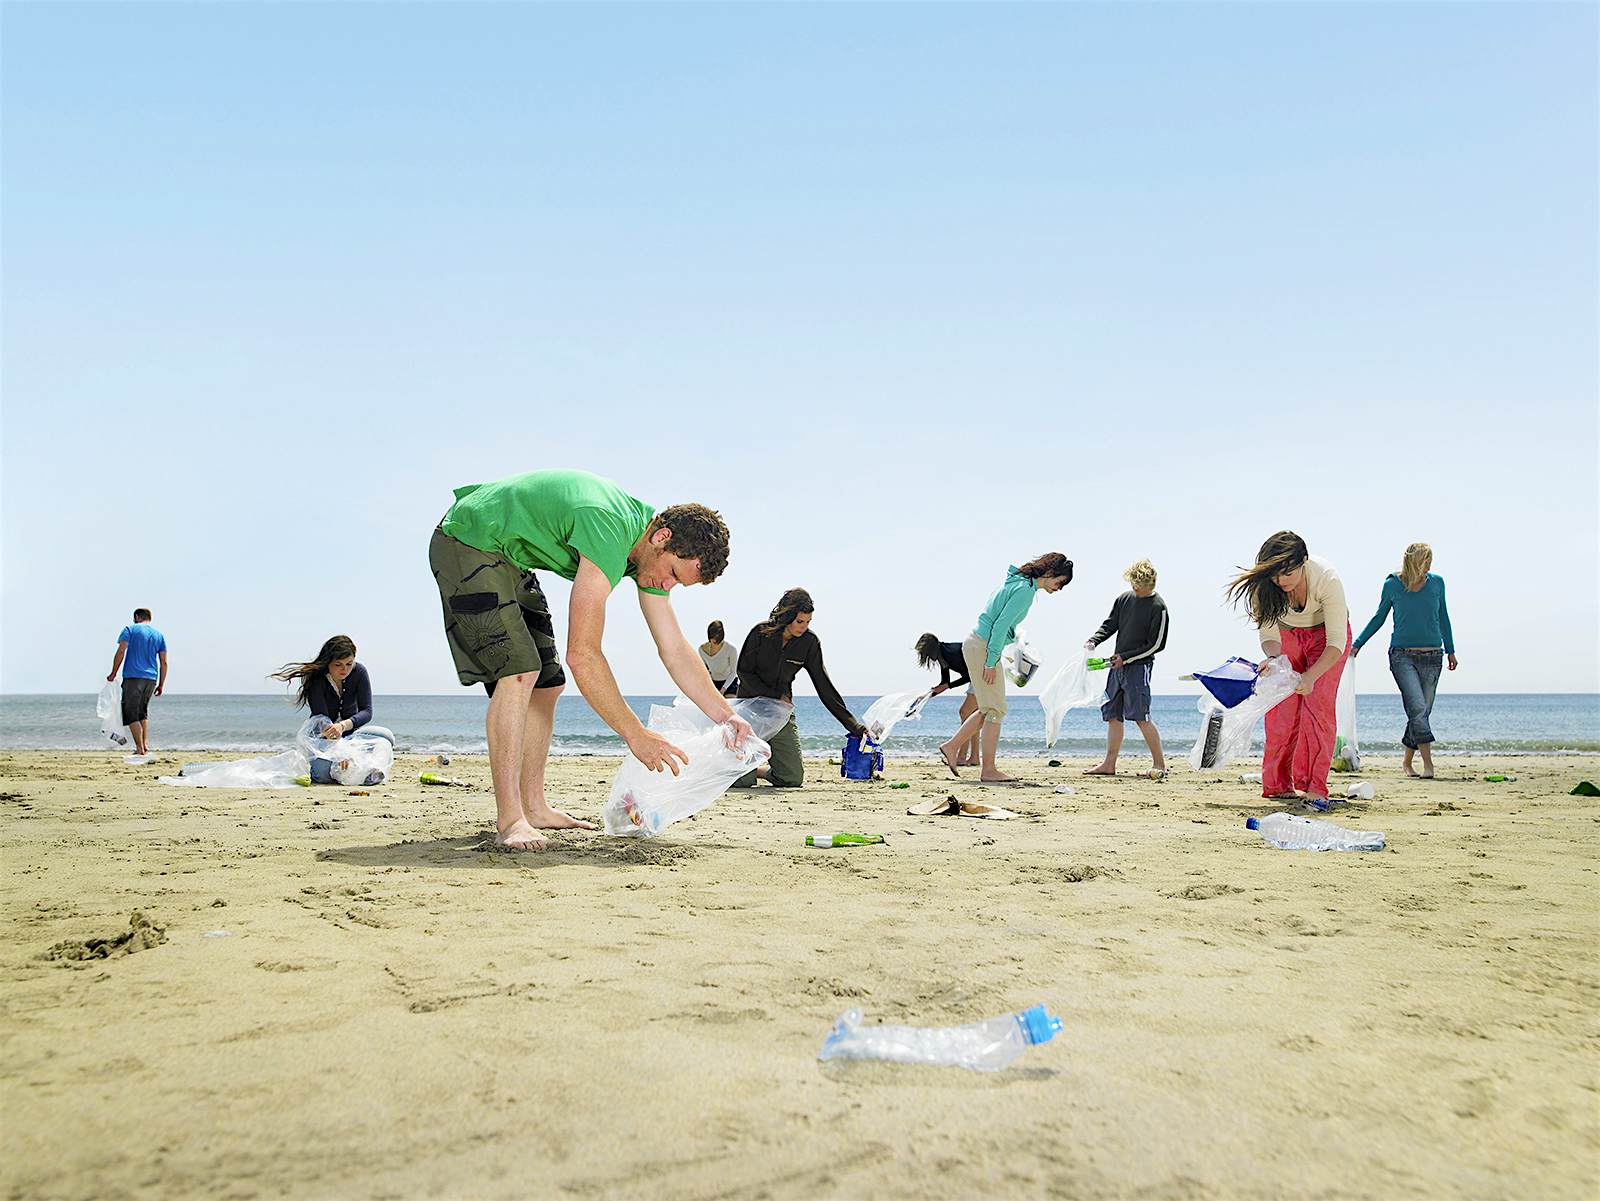 A group of young people clearing plastic from a beach in Cornwall, England © Frank and Helena / Getty Images